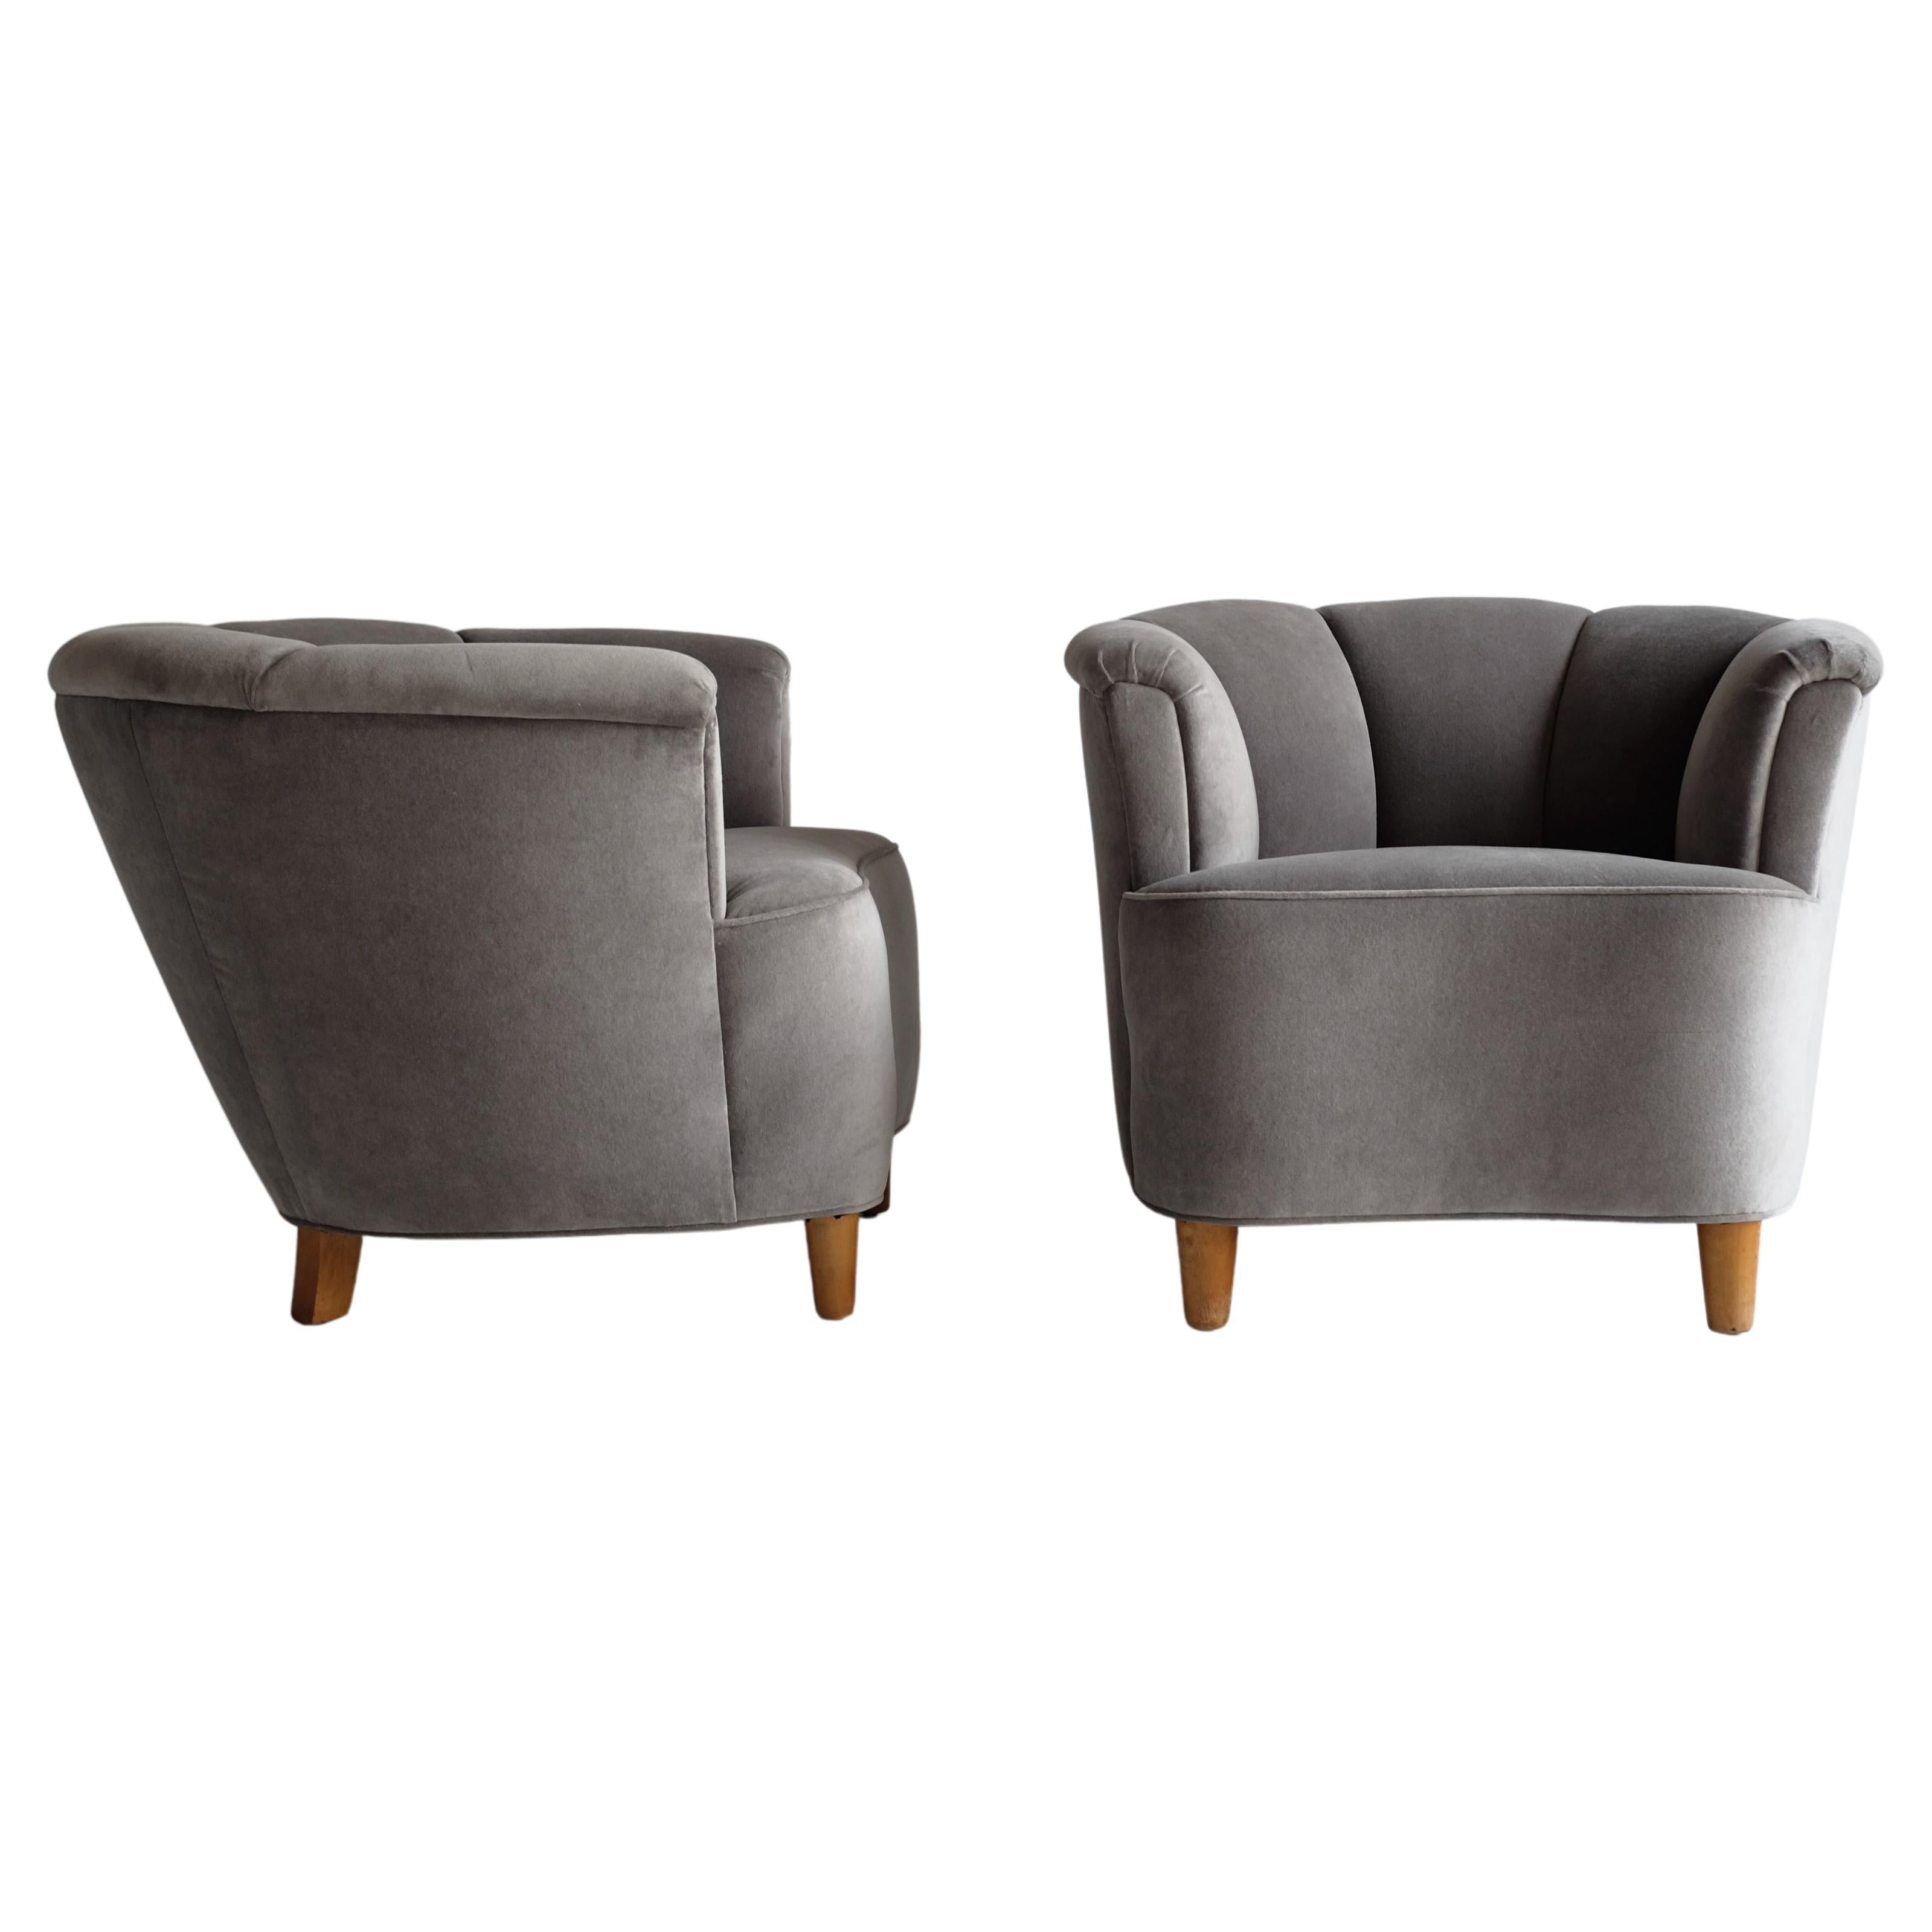 Pair of Swedish Modern Lounge Chairs For Sale